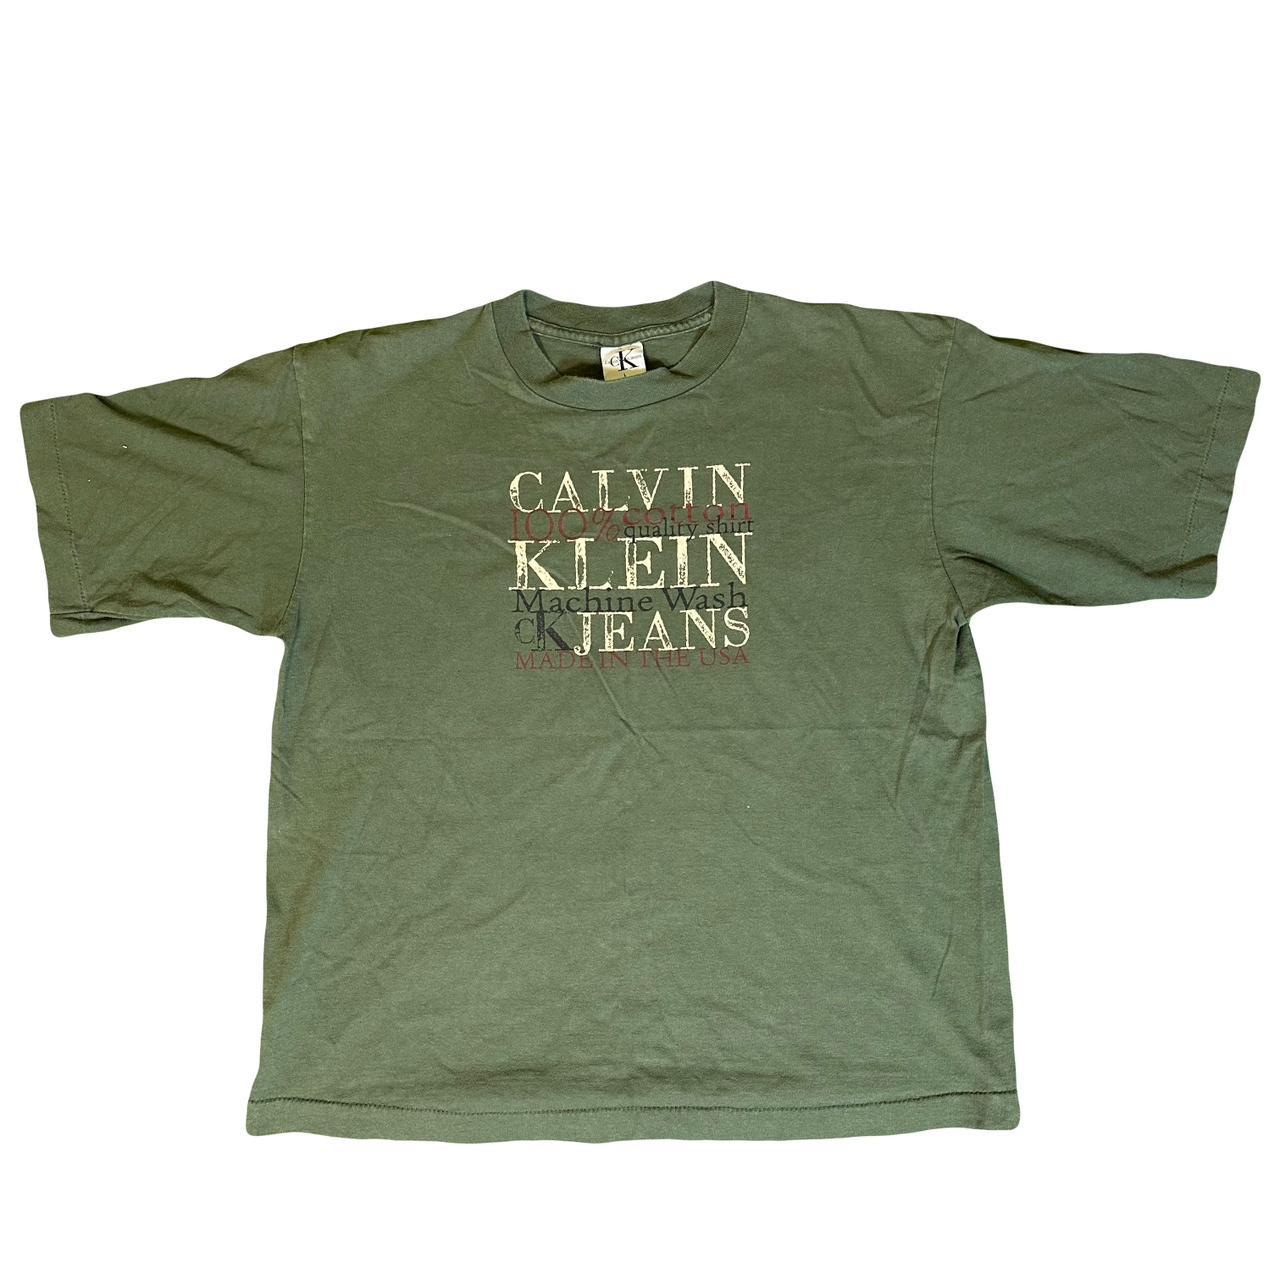 Vintage Calvin Klein Jeans T-shirt Made in USA